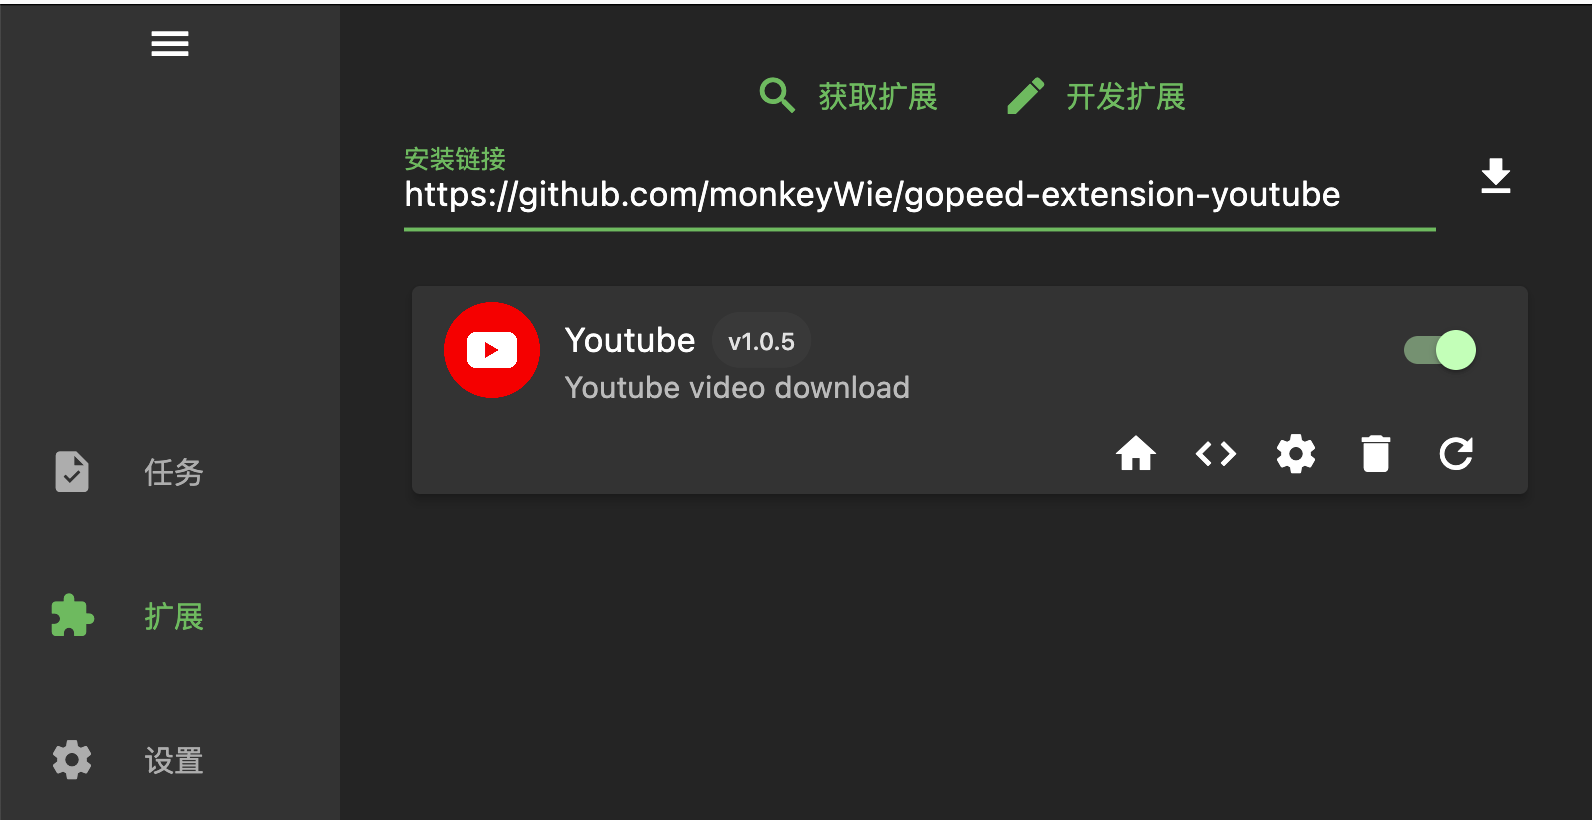 gopeed-extension-youtube